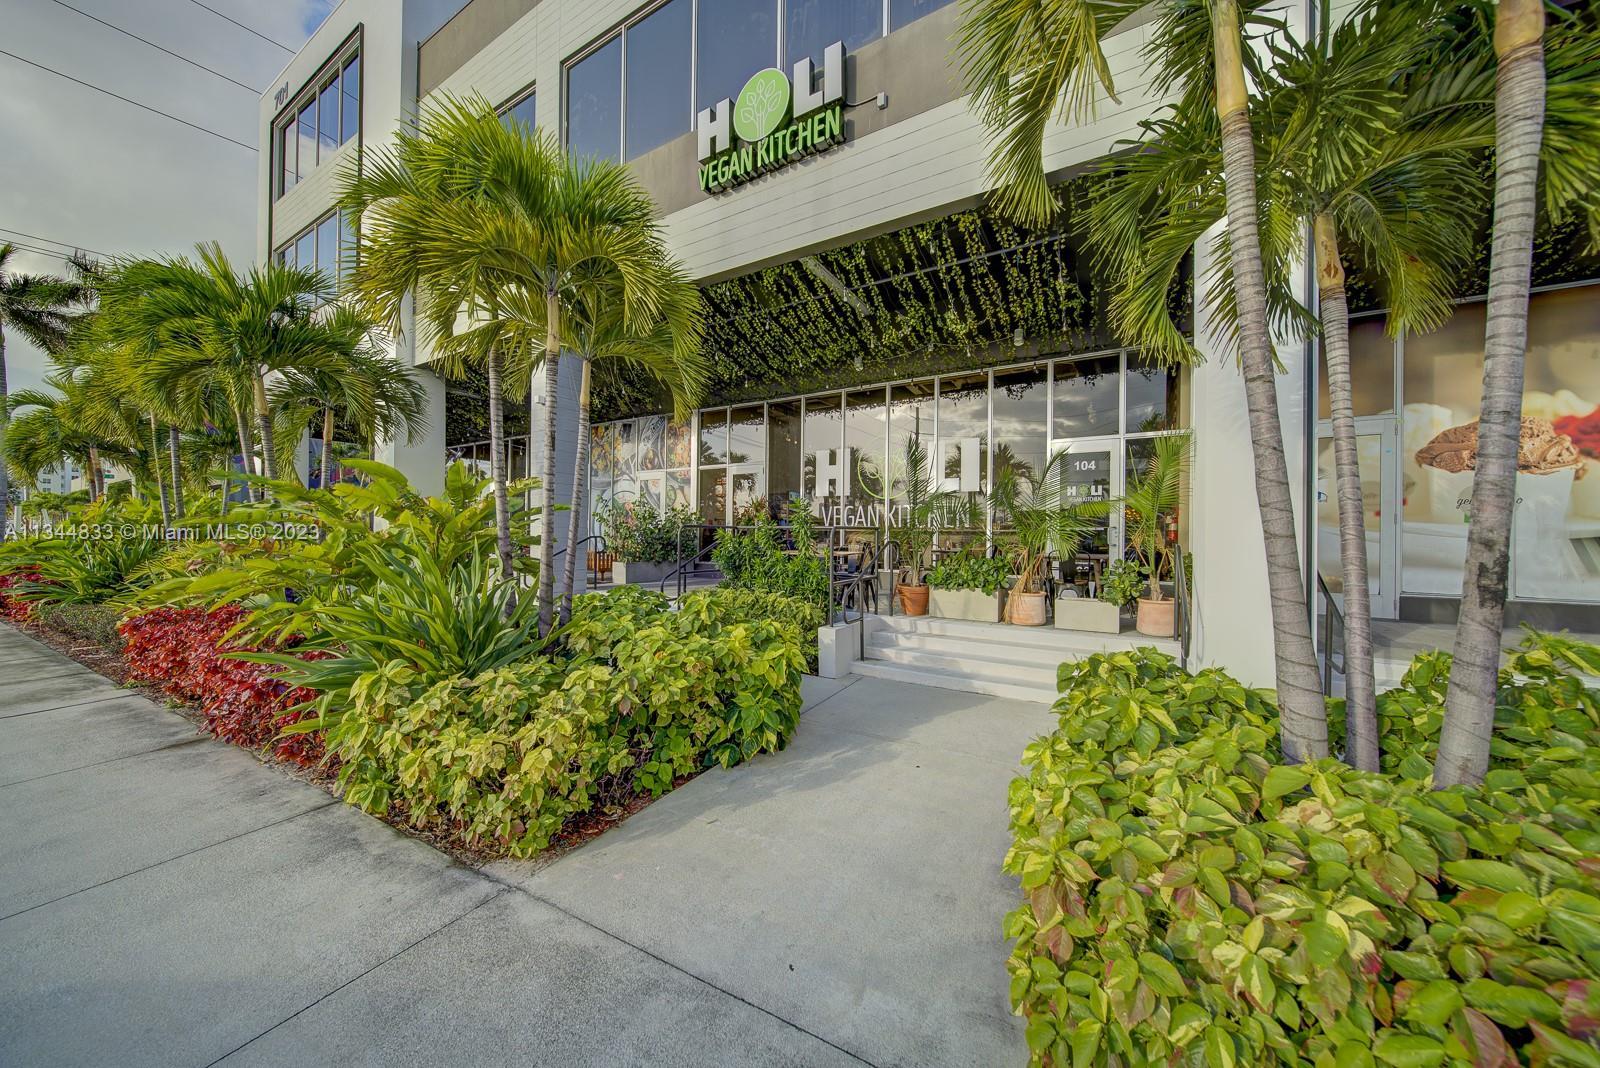 Restaurant For Sale in Hallandale. Currently, it is a vegan concept but can be changed. The shopping